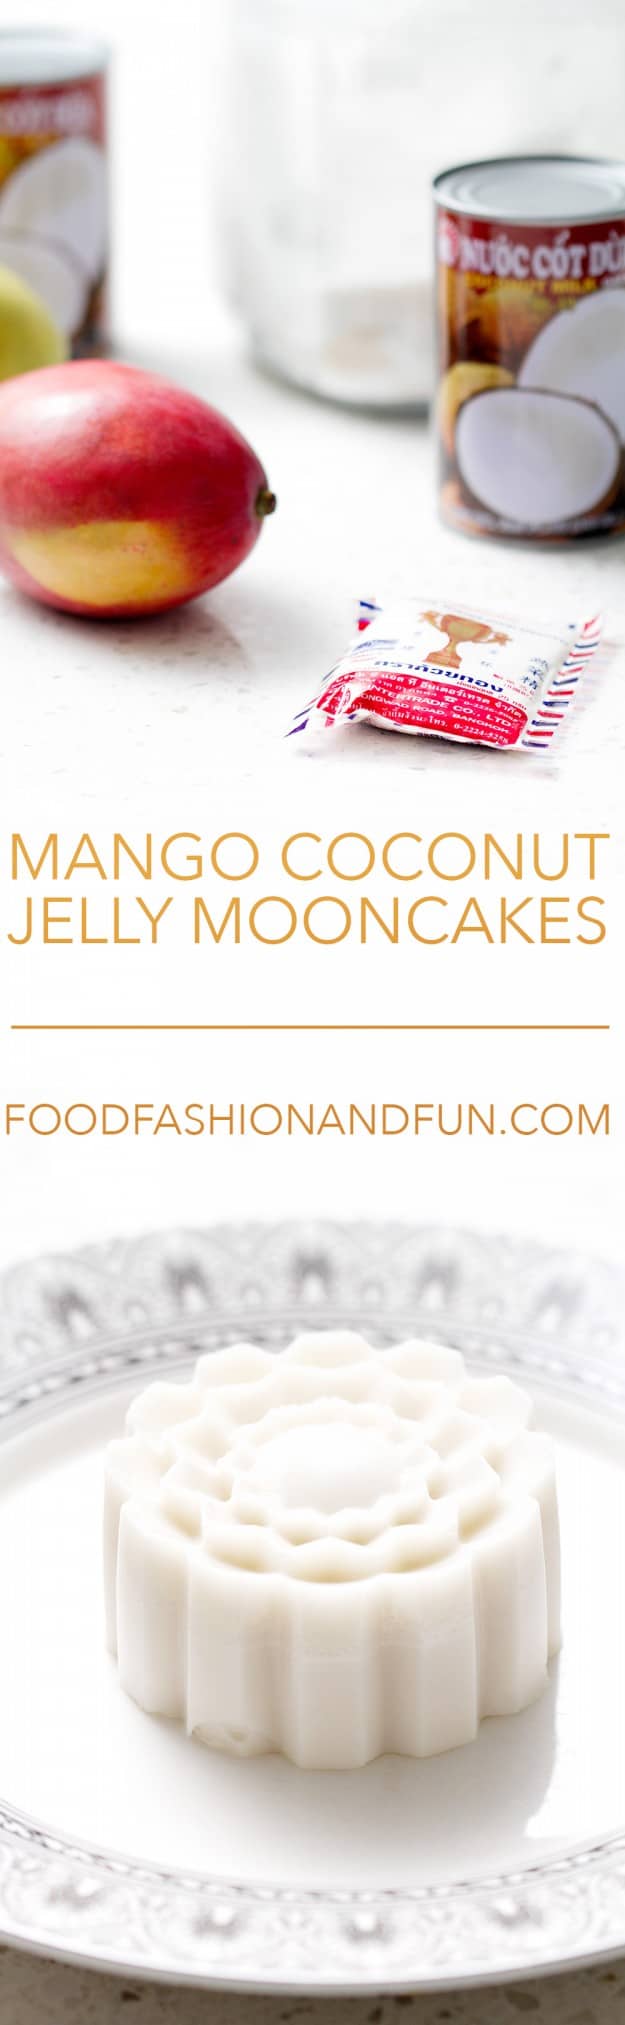 Mango Coconut Jelly Mooncakes made with Agar Agar to celebrate the Chinese New Year